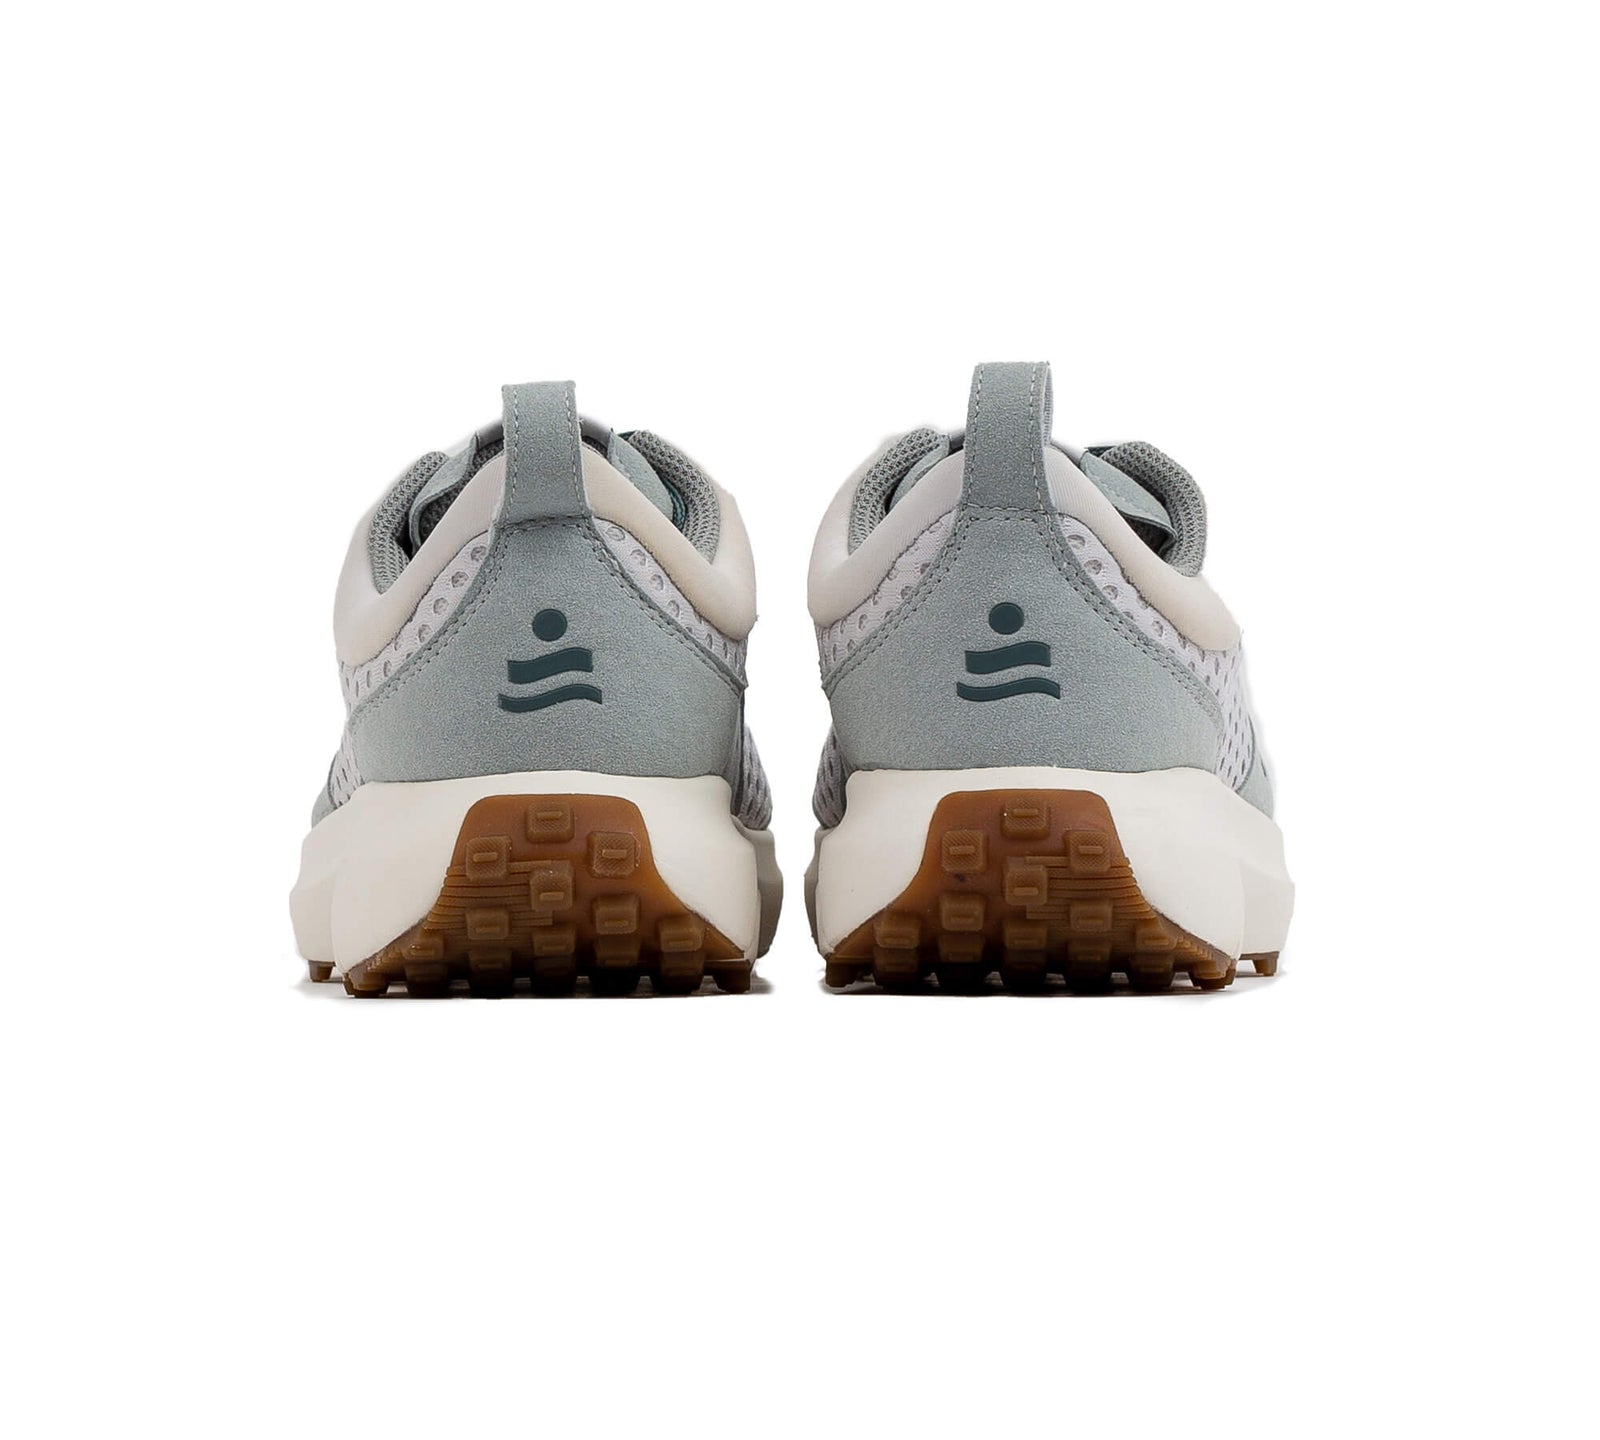 Back view of a pair of the Everywhere Hilma Running shoe in Mirage Grey